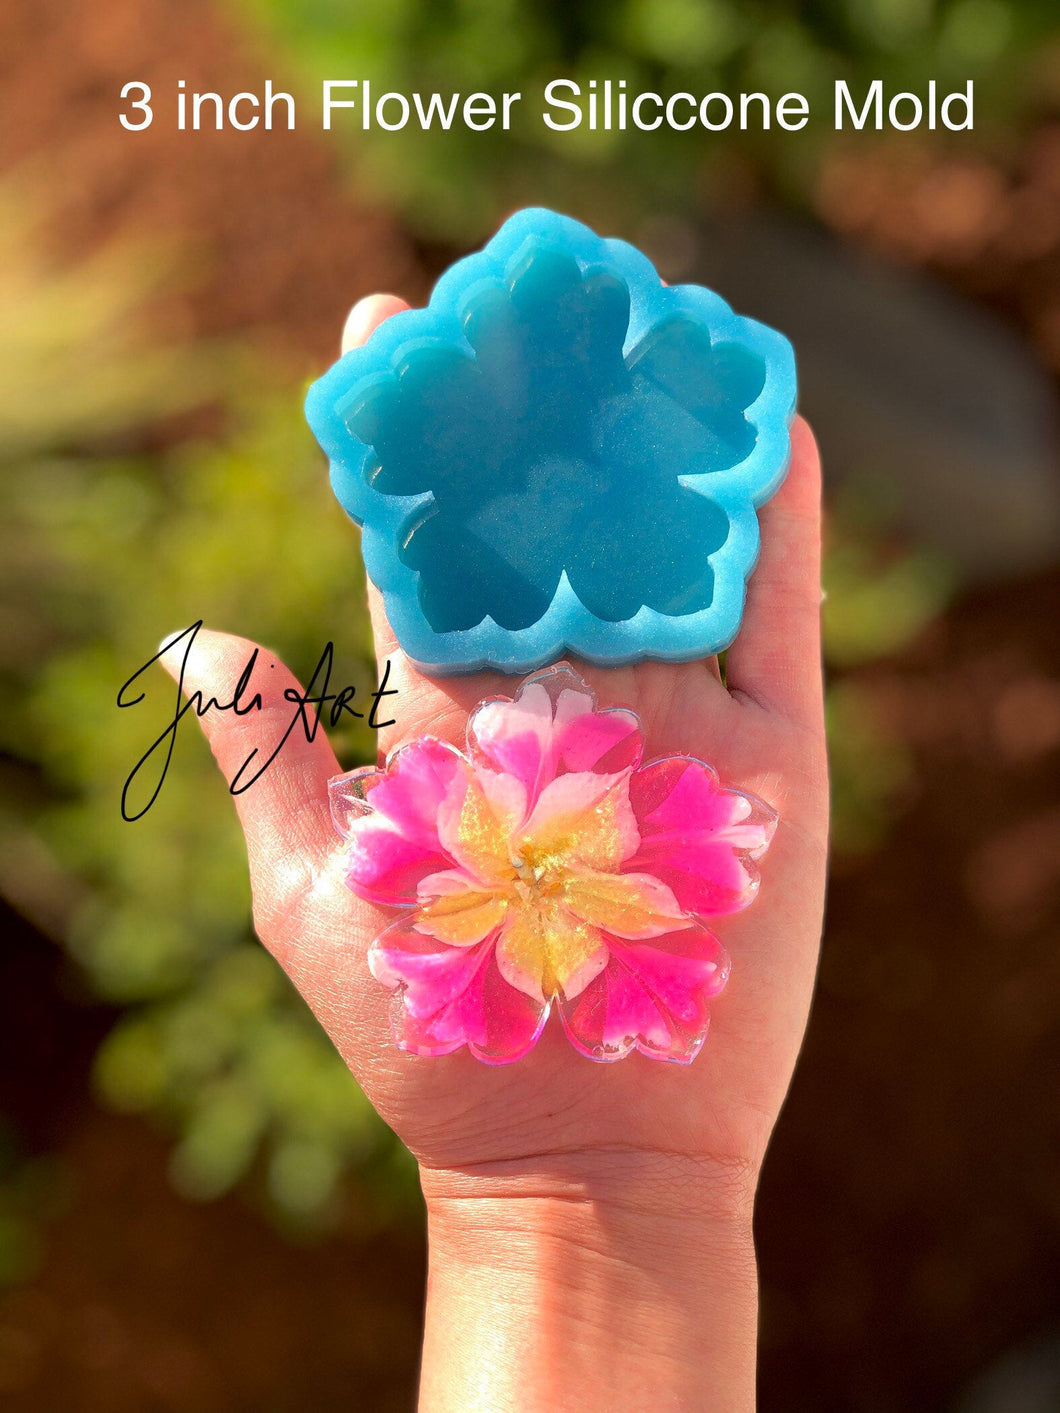 3 inch Small Flower Silicone Mold for Resin casting